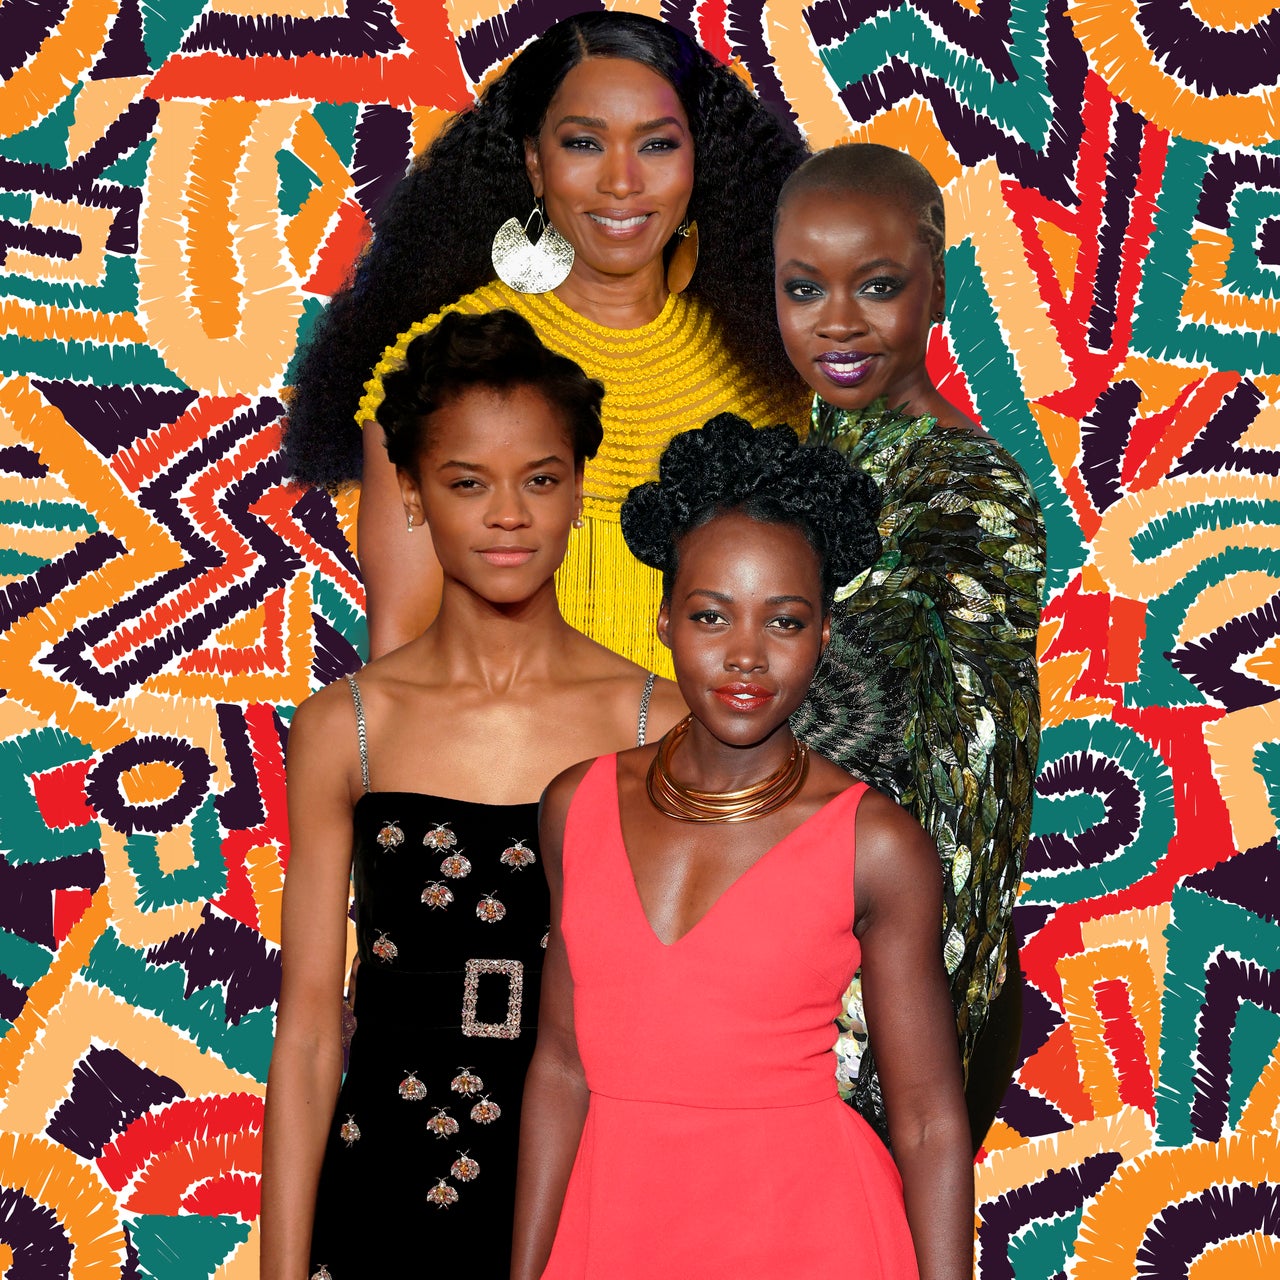 The Best Part Of 'Black Panther?' The Black Women | Essence